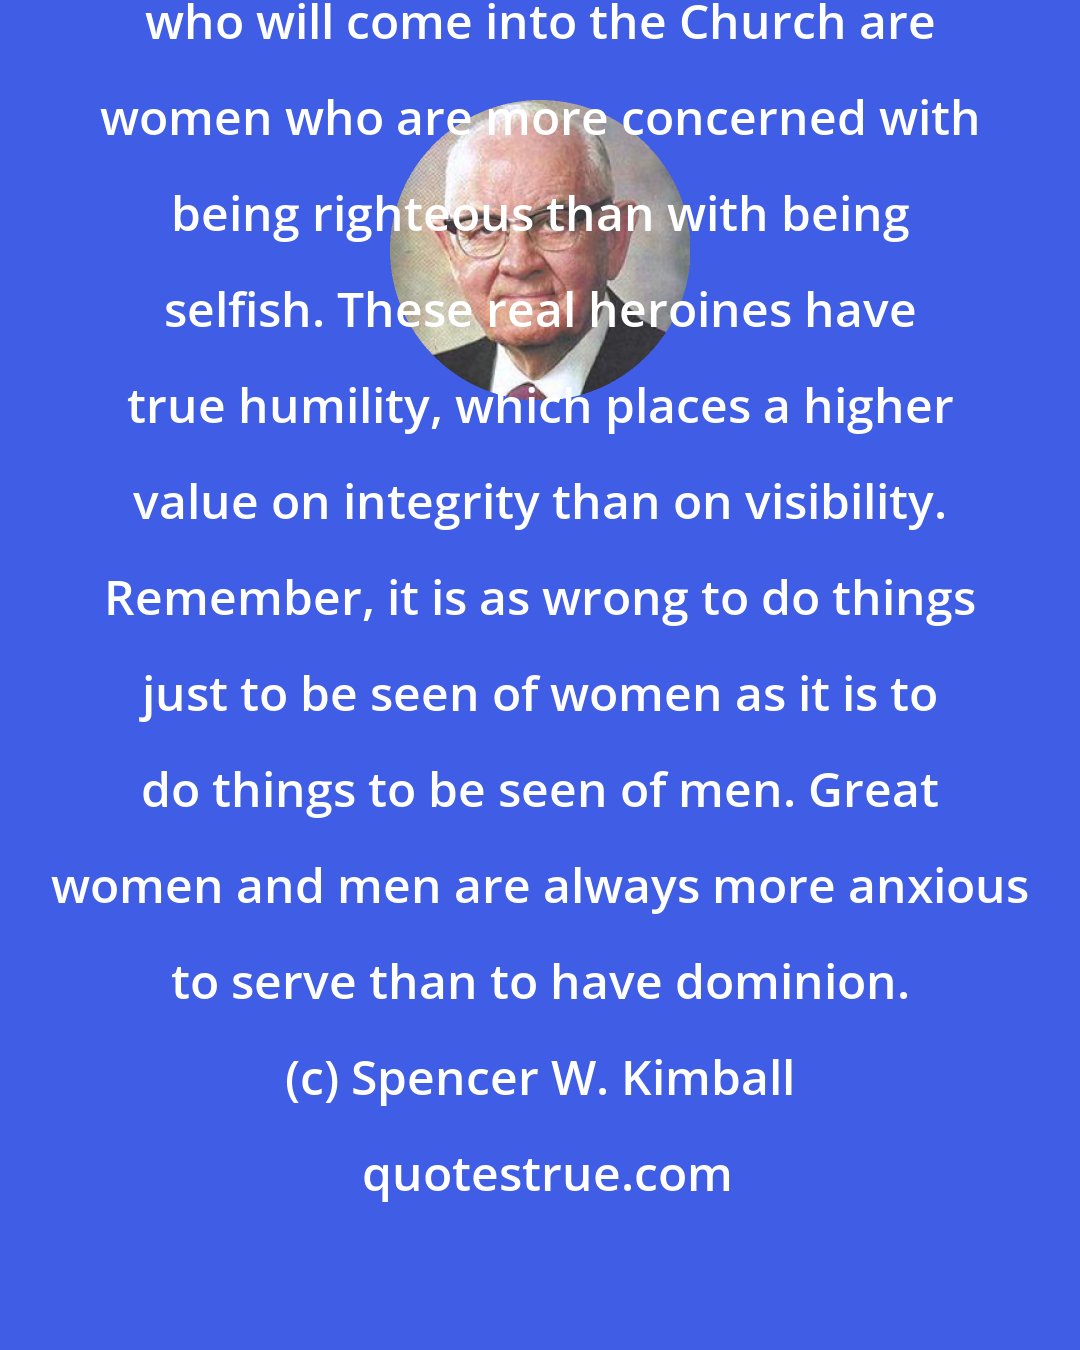 Spencer W. Kimball: Among the real heroines in the world who will come into the Church are women who are more concerned with being righteous than with being selfish. These real heroines have true humility, which places a higher value on integrity than on visibility. Remember, it is as wrong to do things just to be seen of women as it is to do things to be seen of men. Great women and men are always more anxious to serve than to have dominion.